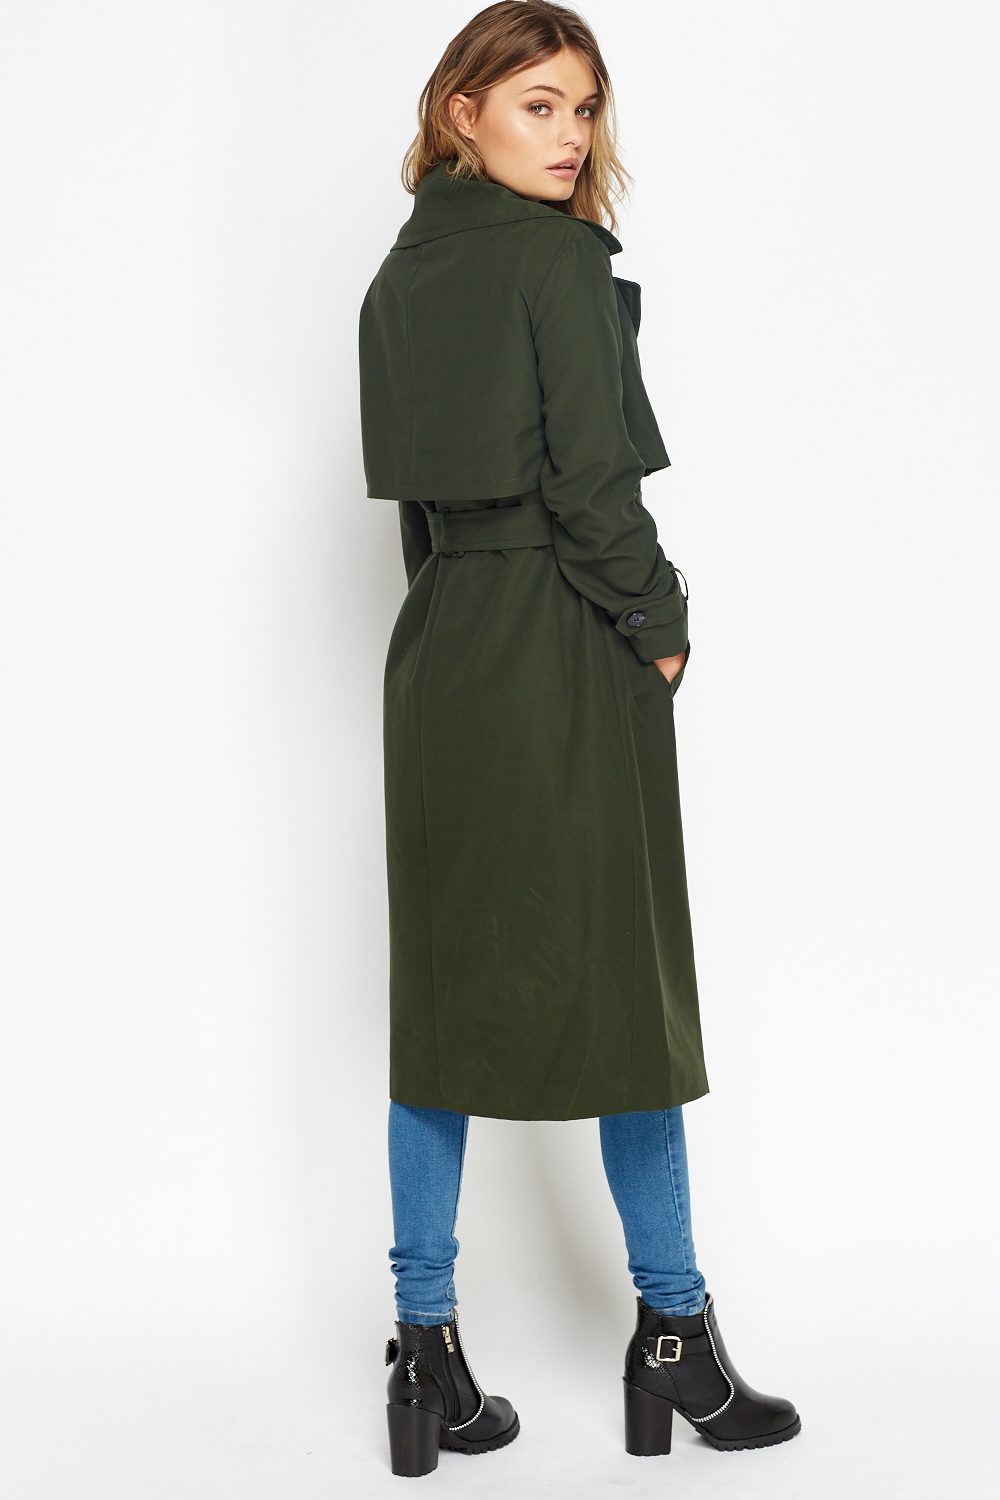 Double Breasted Green Coat - Just $7